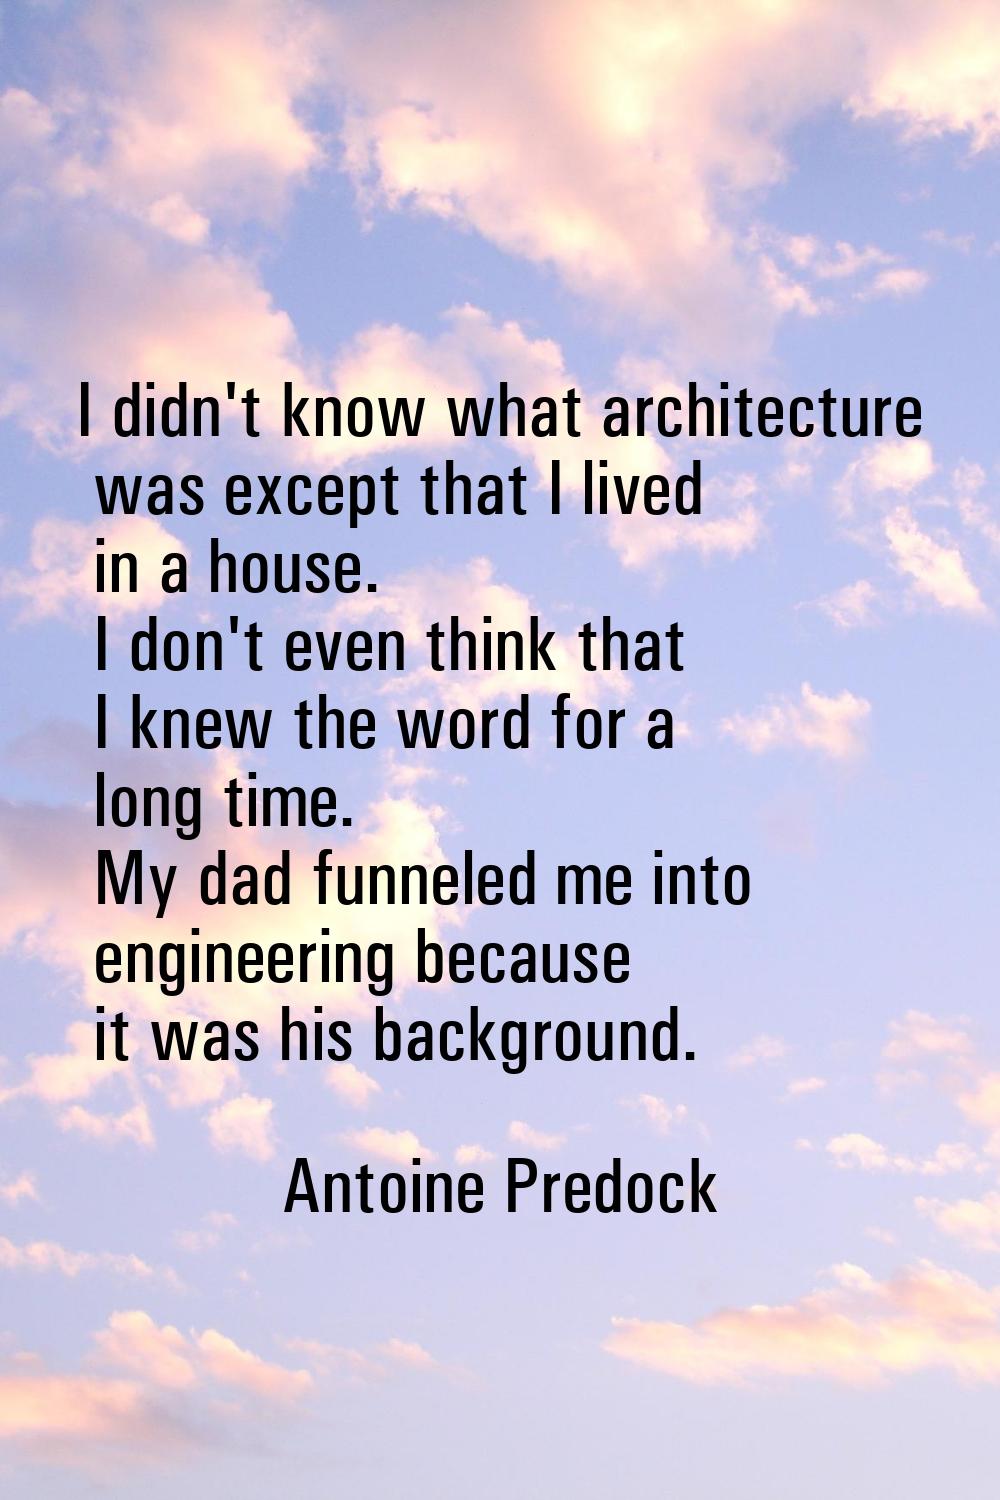 I didn't know what architecture was except that I lived in a house. I don't even think that I knew 